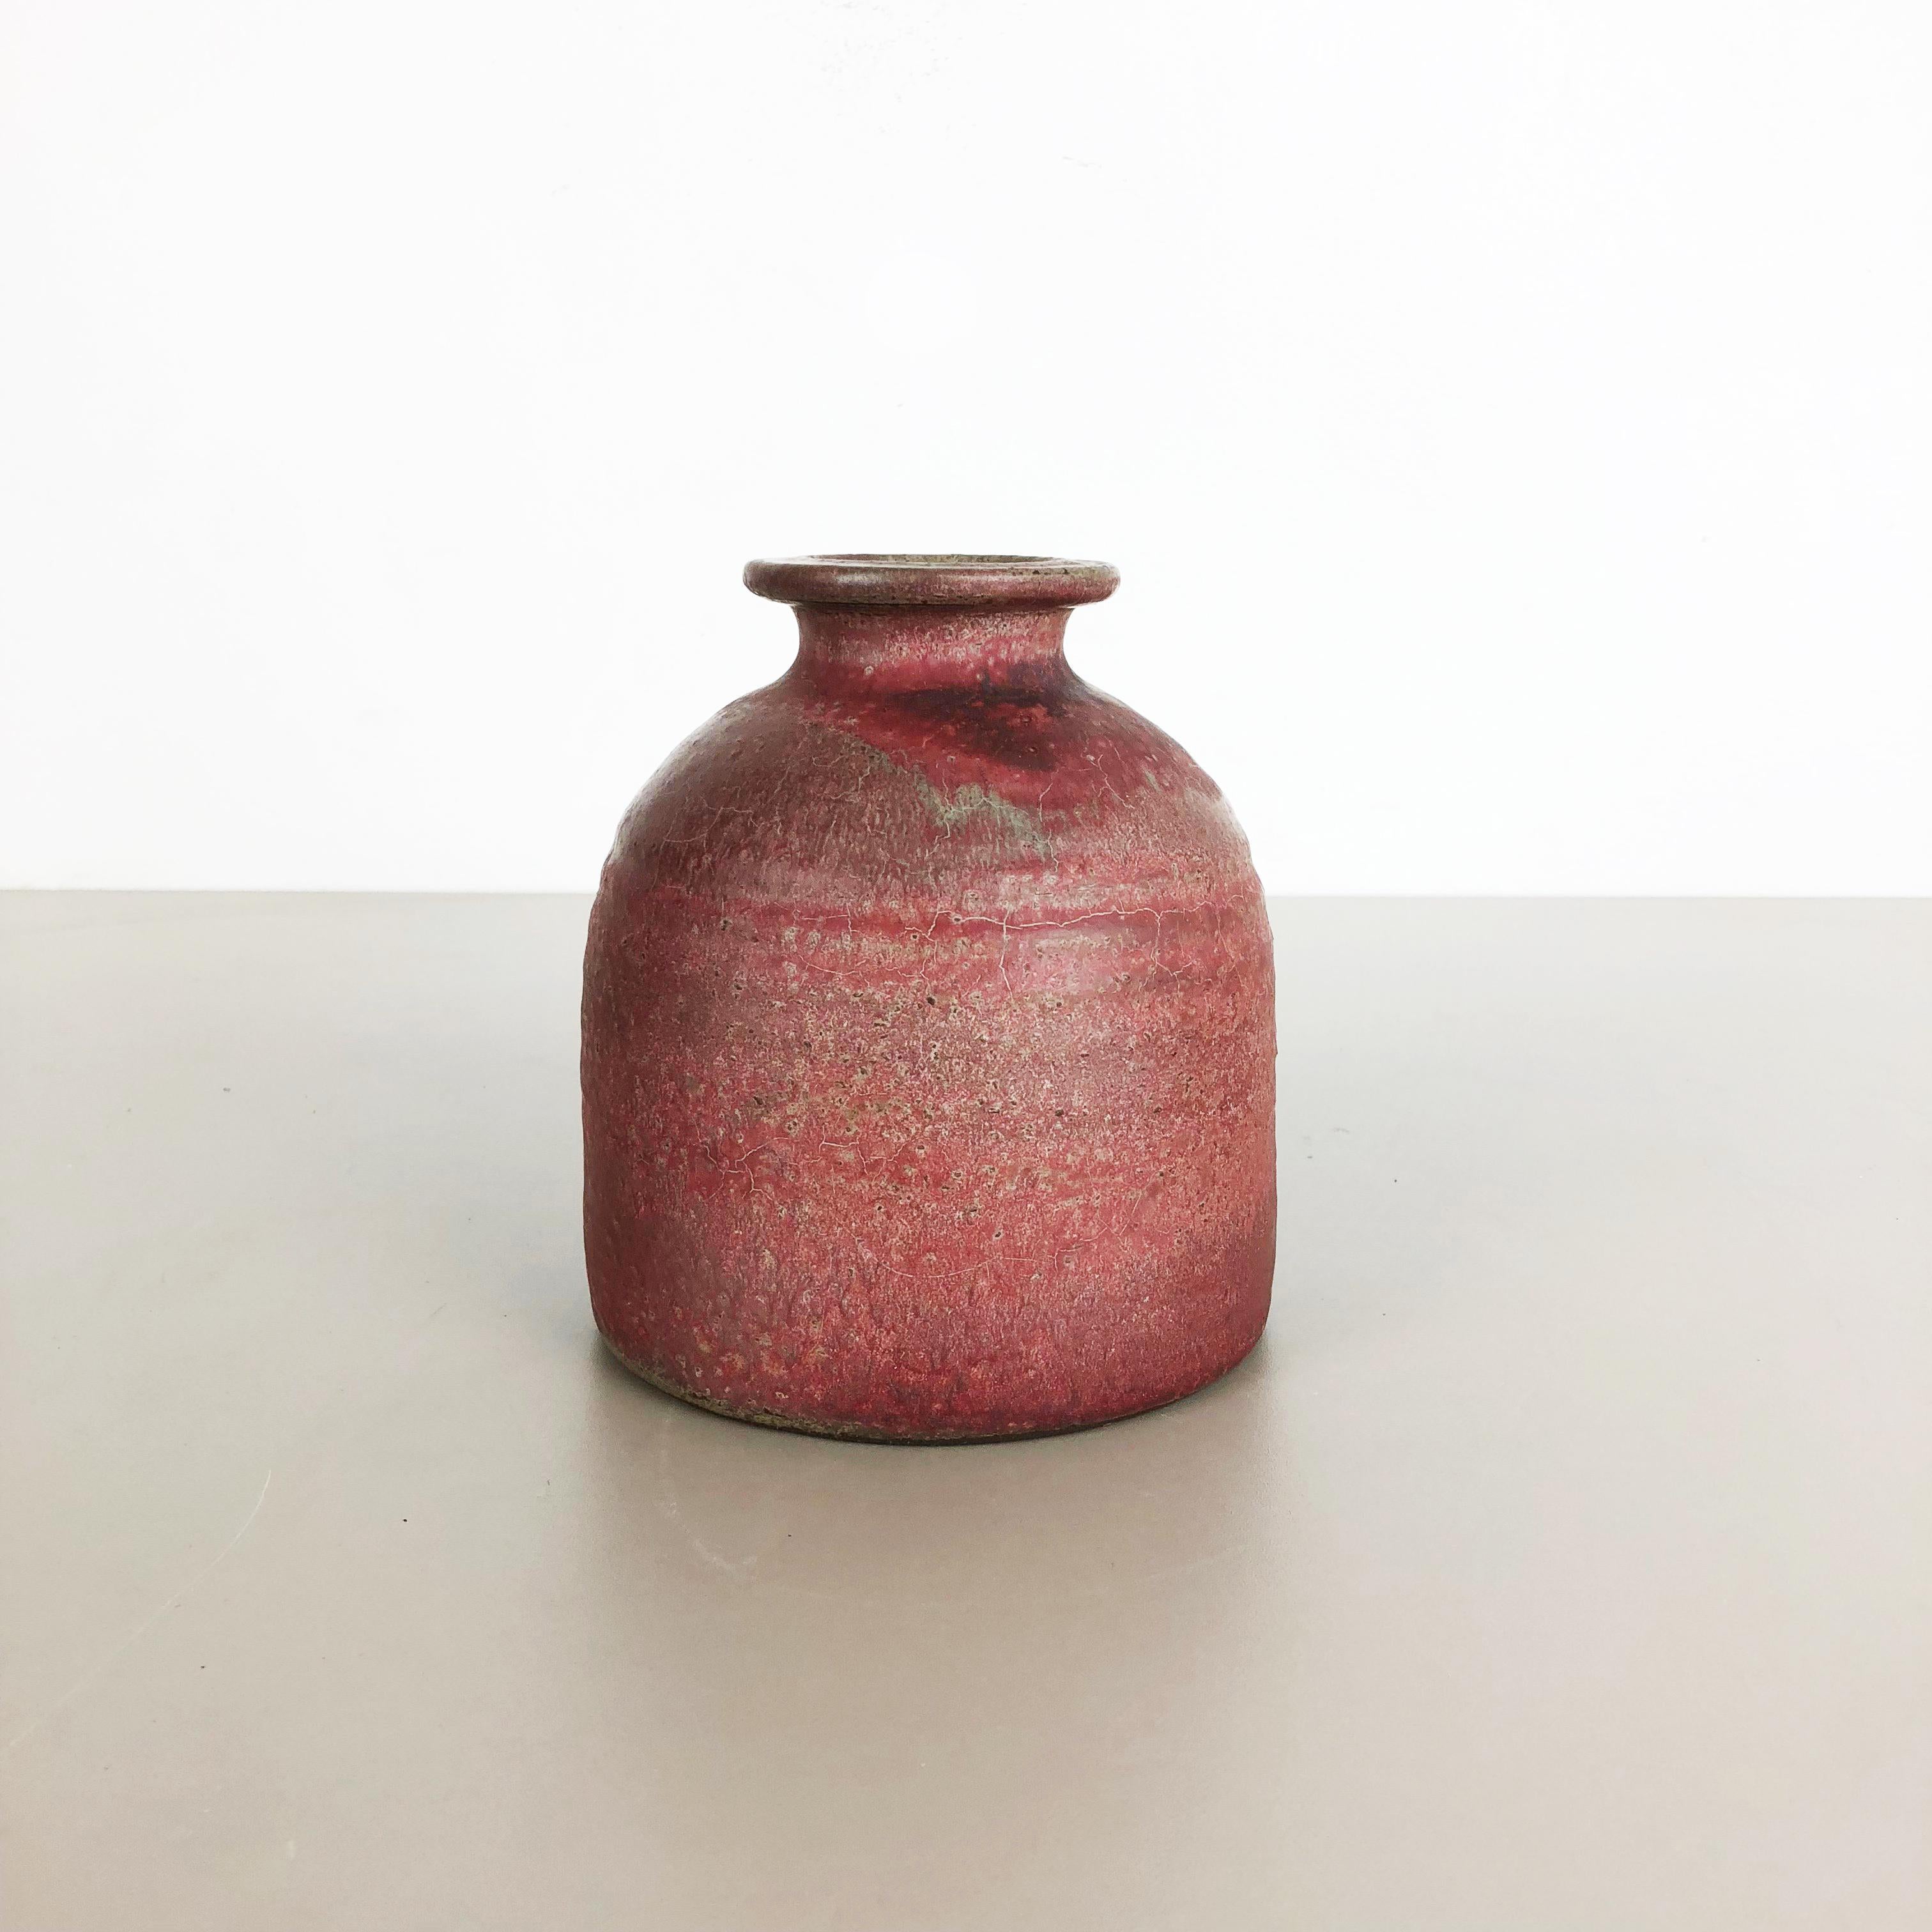 Article:

Ceramic vase


Producer:

Mobach, Netherlands


Designer:

Piet Knepper




Decade:

1960-1965



Description:

This original vintage studio pottery vase was produced in the 1960s by Piet Knepper for Mobach in